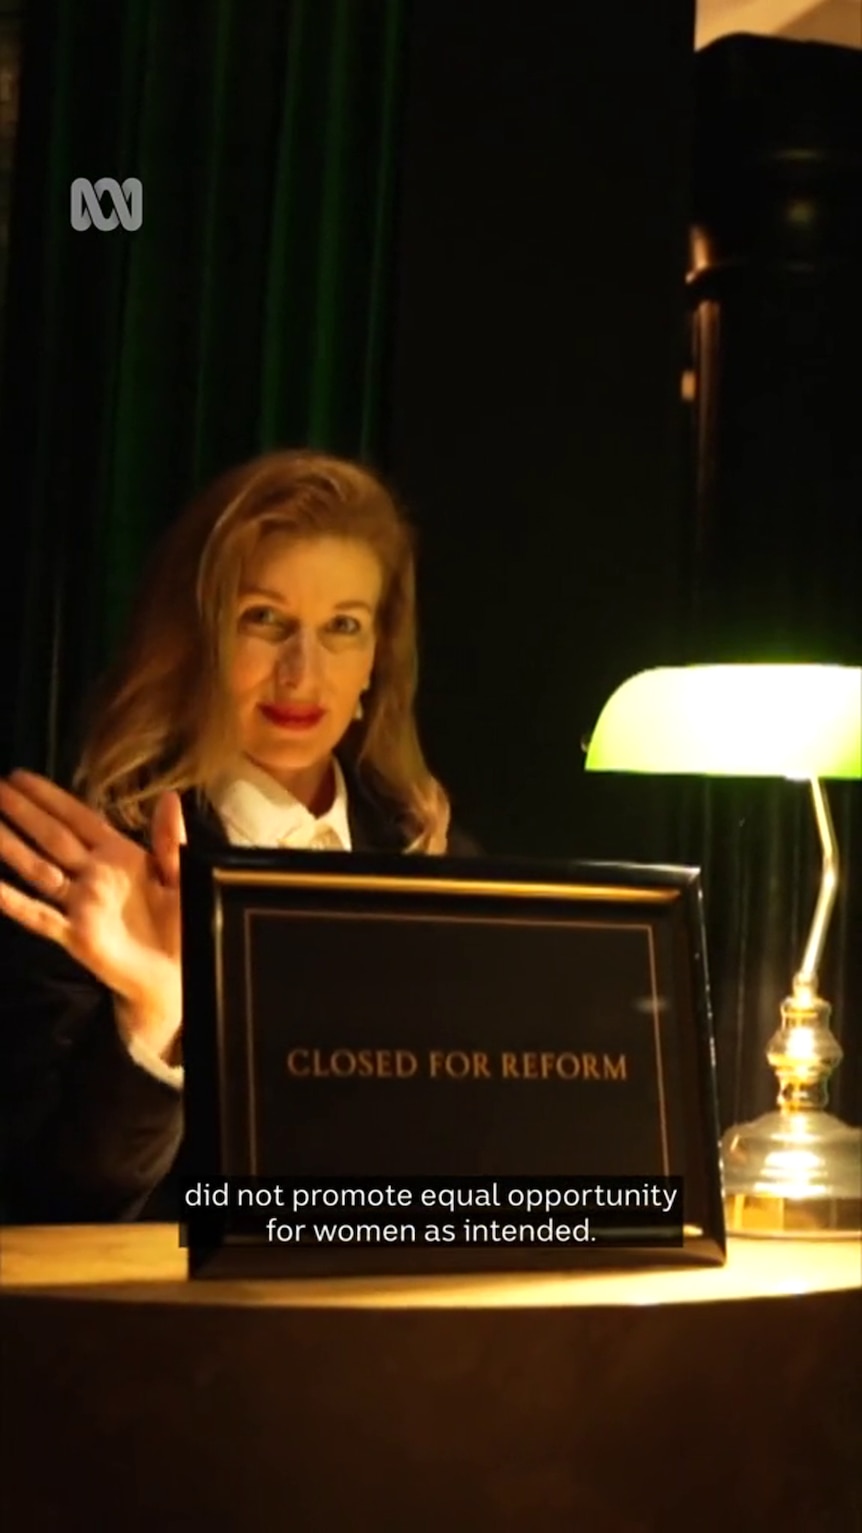 Neatly dressed middle-aged white woman sits near lamp with sign that reads "closed for reform"